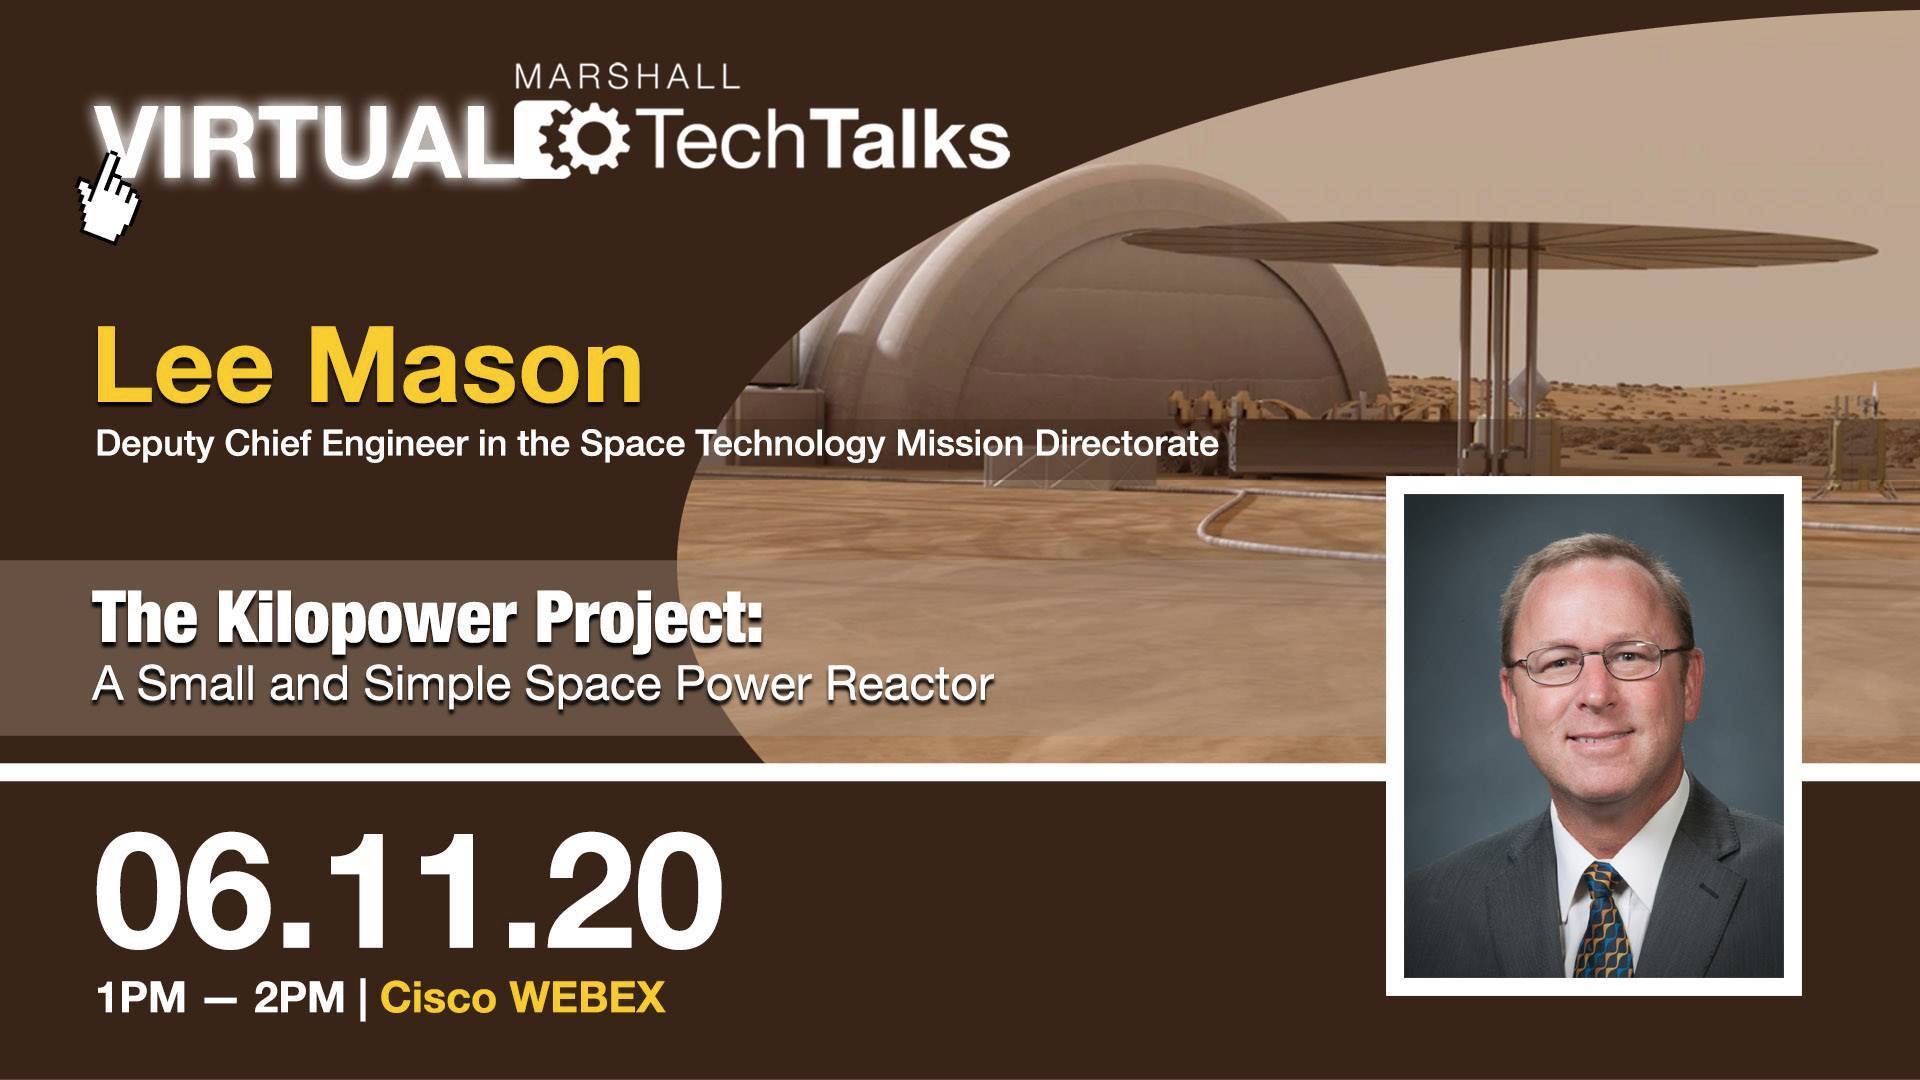 The latest installment of the Marshall Center’s Tech Talk series will be held virtually at 1 p.m. June 11, featuring Lee Mason.